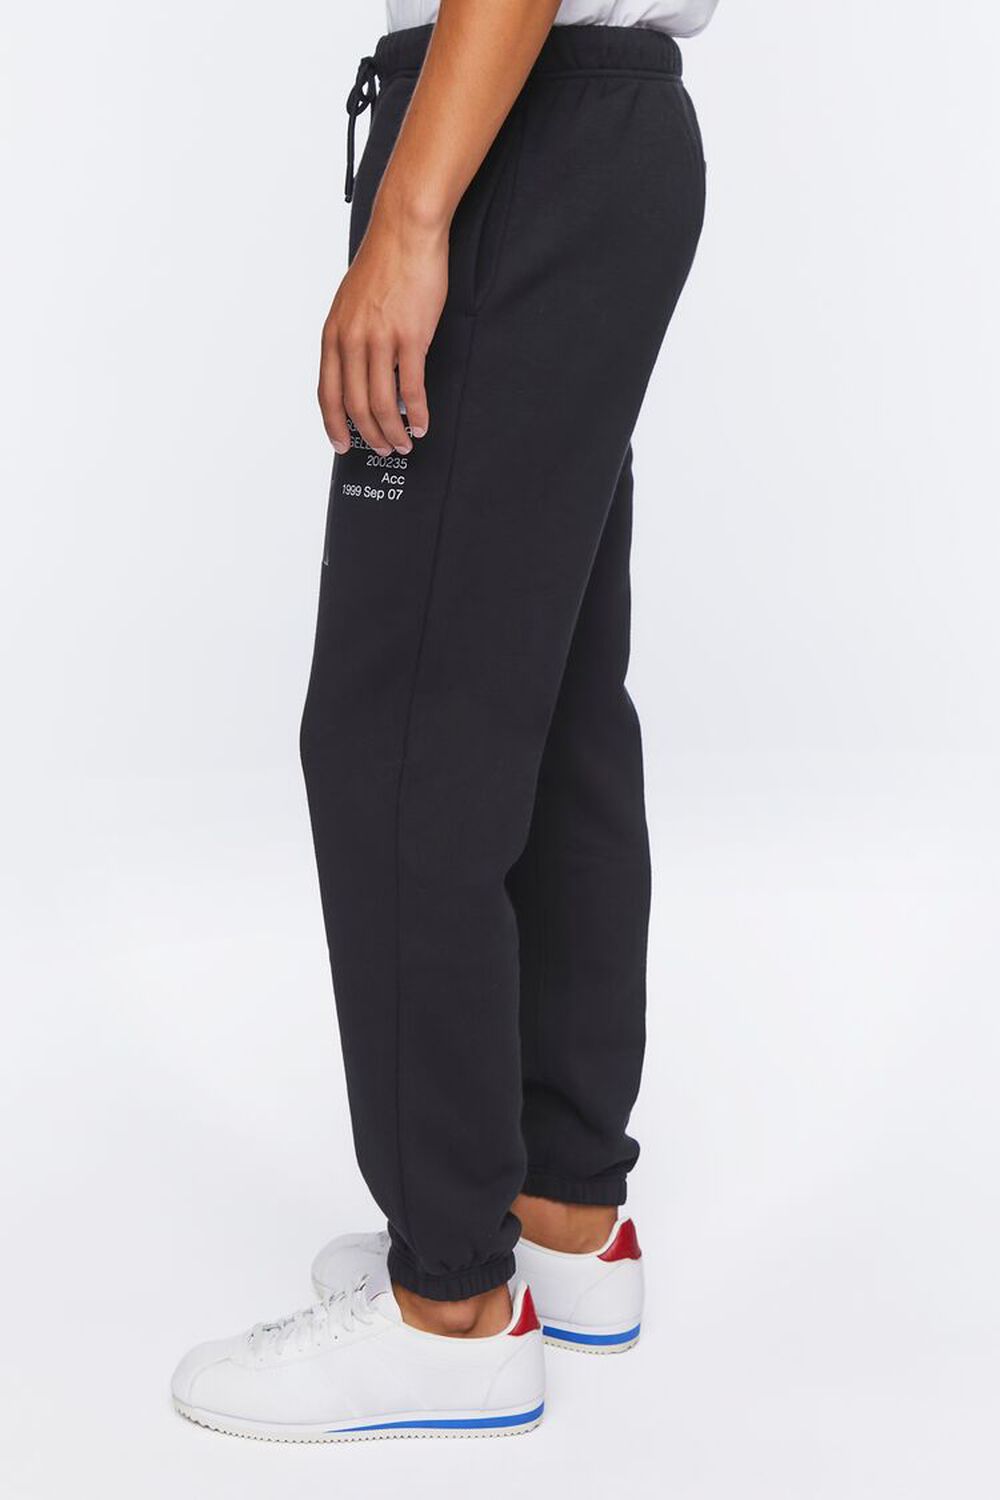 BLACK/MULTI Embroidered Rise Graphic Joggers, image 3